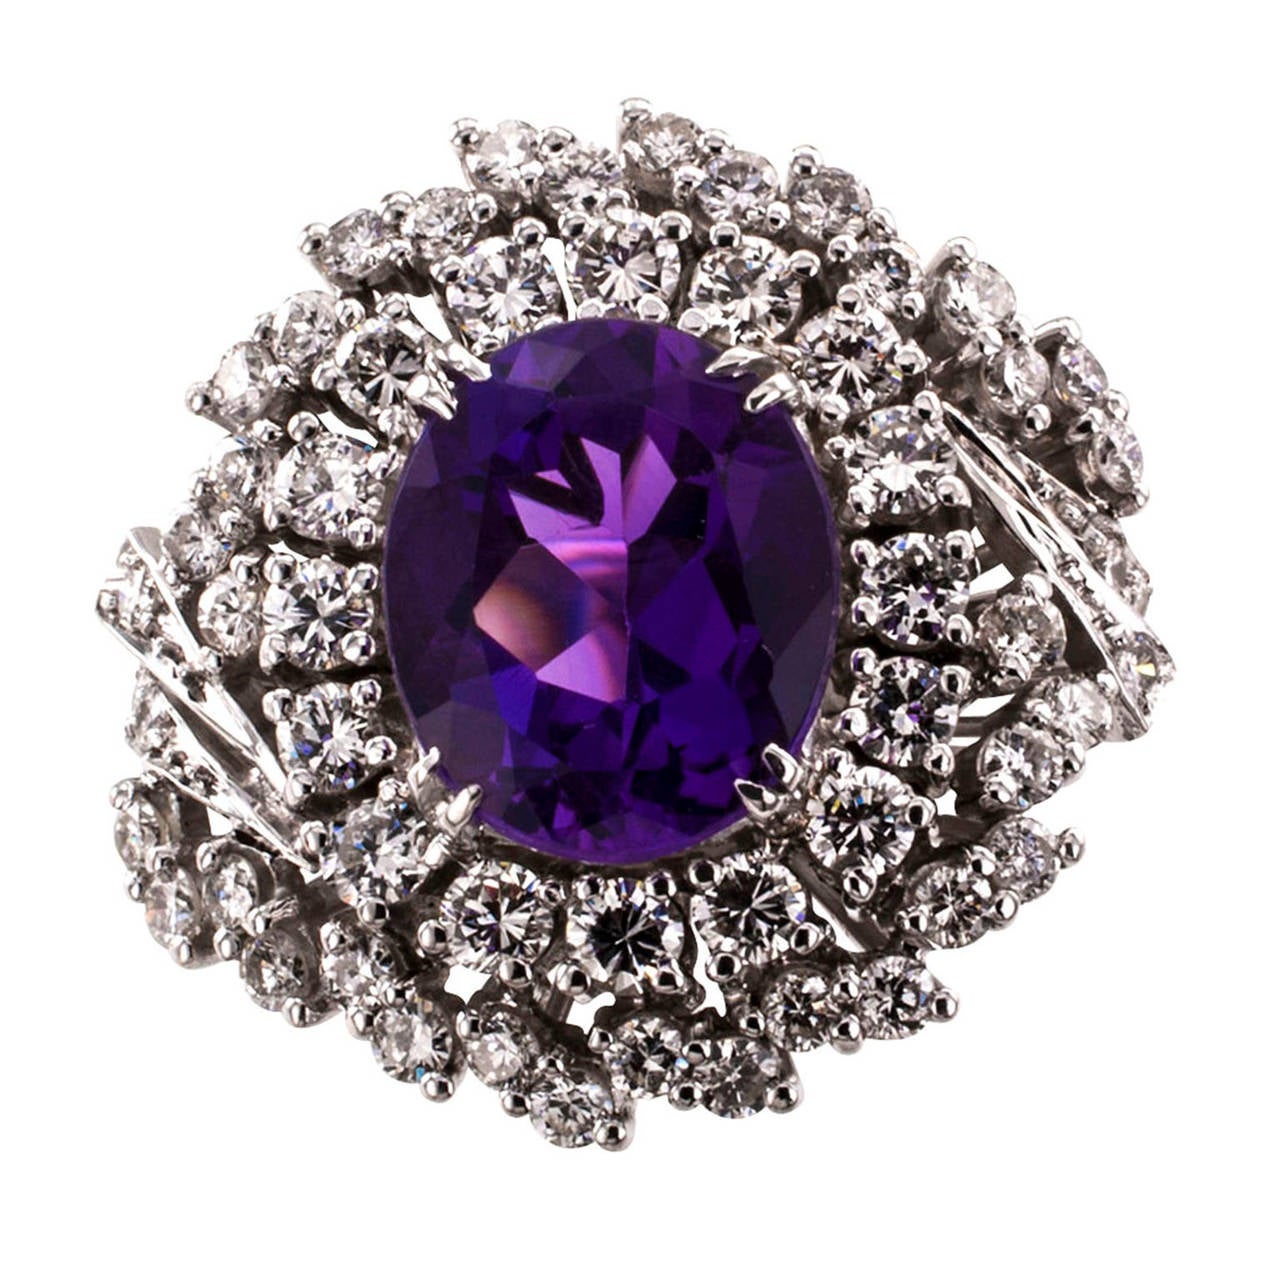 Amethyst and Diamond Cocktail Ring Circa 1960

If you are going to have just one amethyst ring, let it be one as nice and beautiful as this one is.  Wearing this ring will make you feel like a queen!  Really.  The color of the amethyst is rich